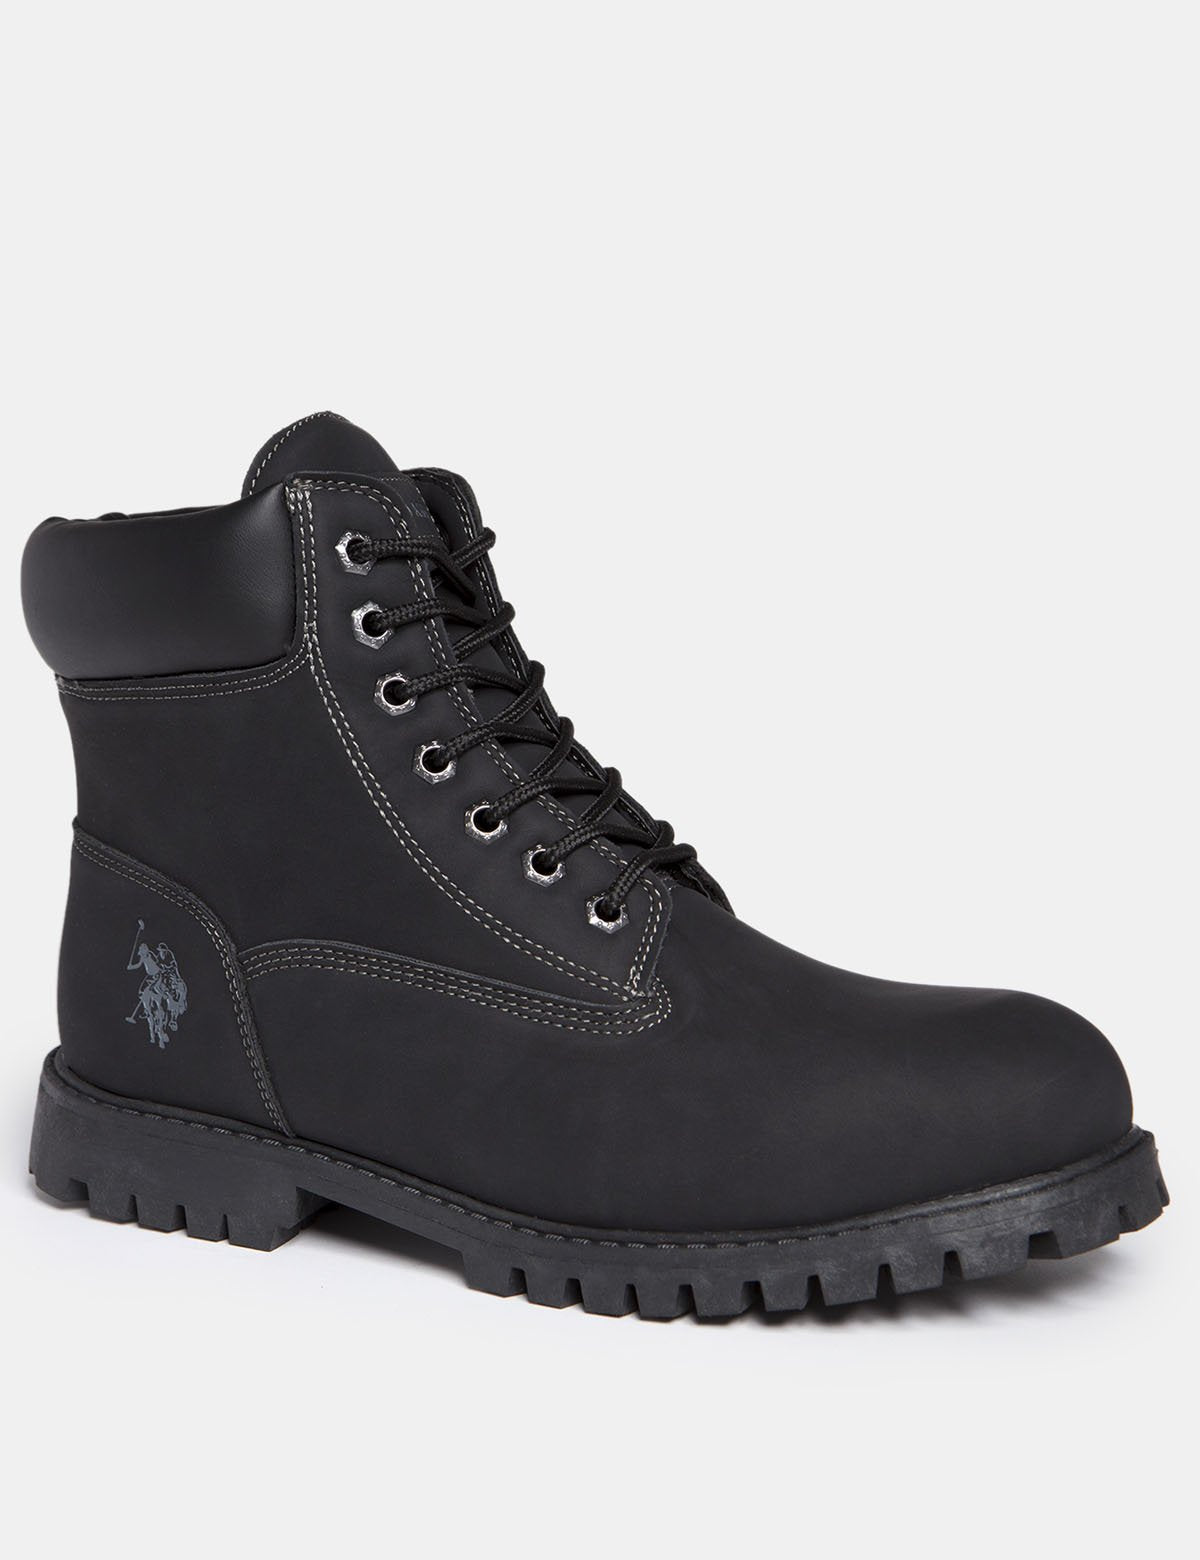 polo assassin boots